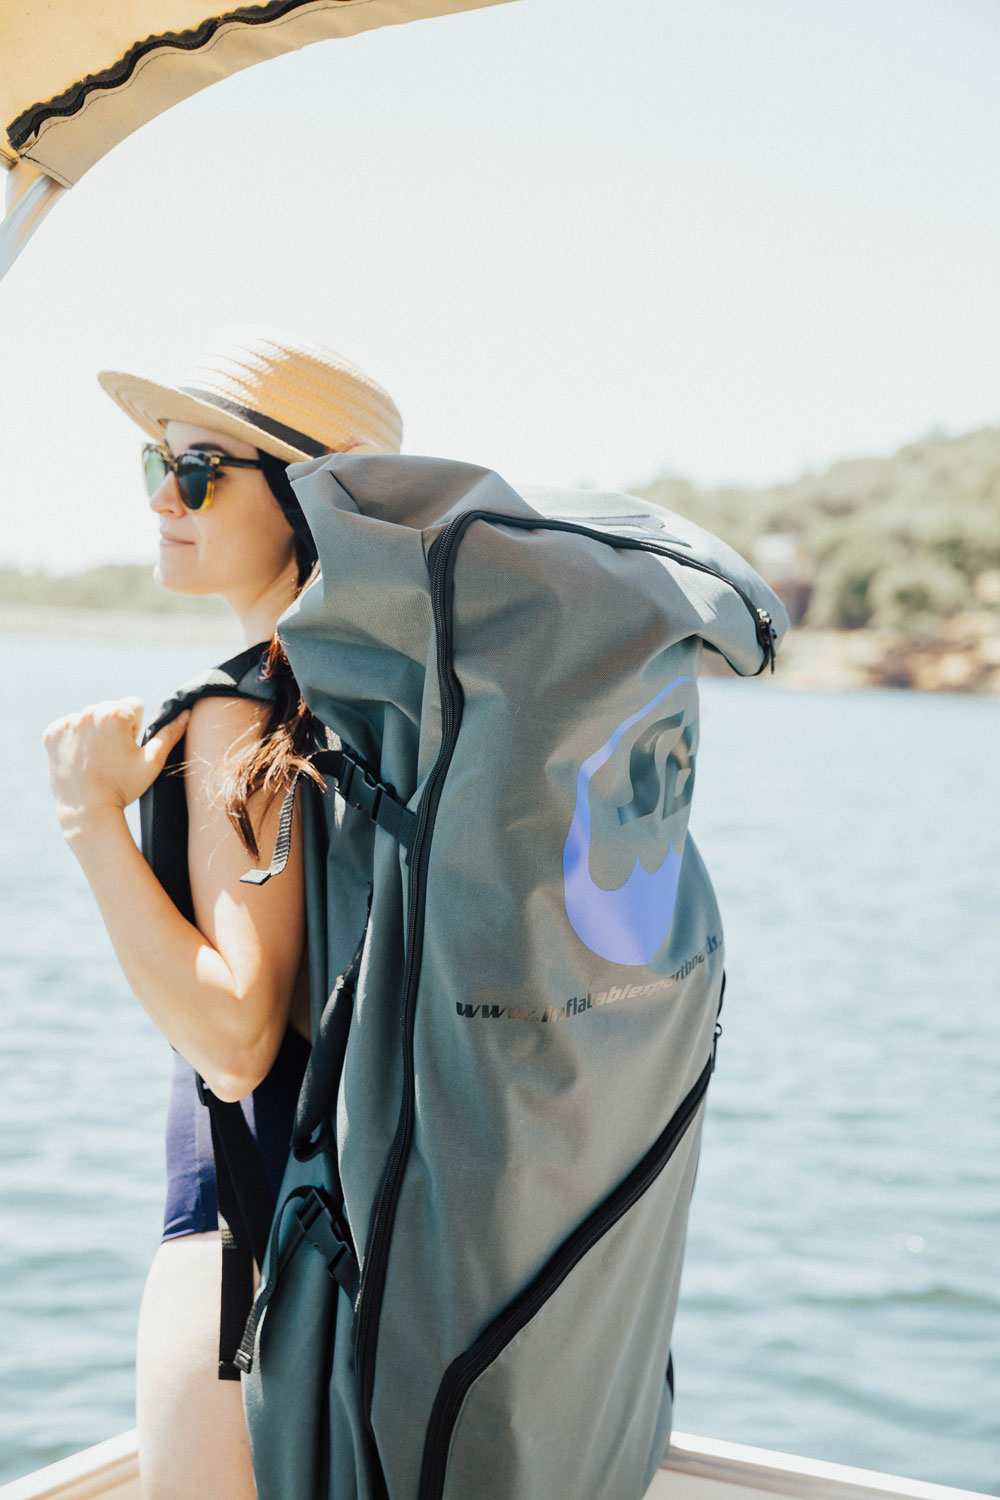 https://inflatablesportboats.com/wp-content/uploads/2022/04/madi-with-paddleboard-bag.jpg